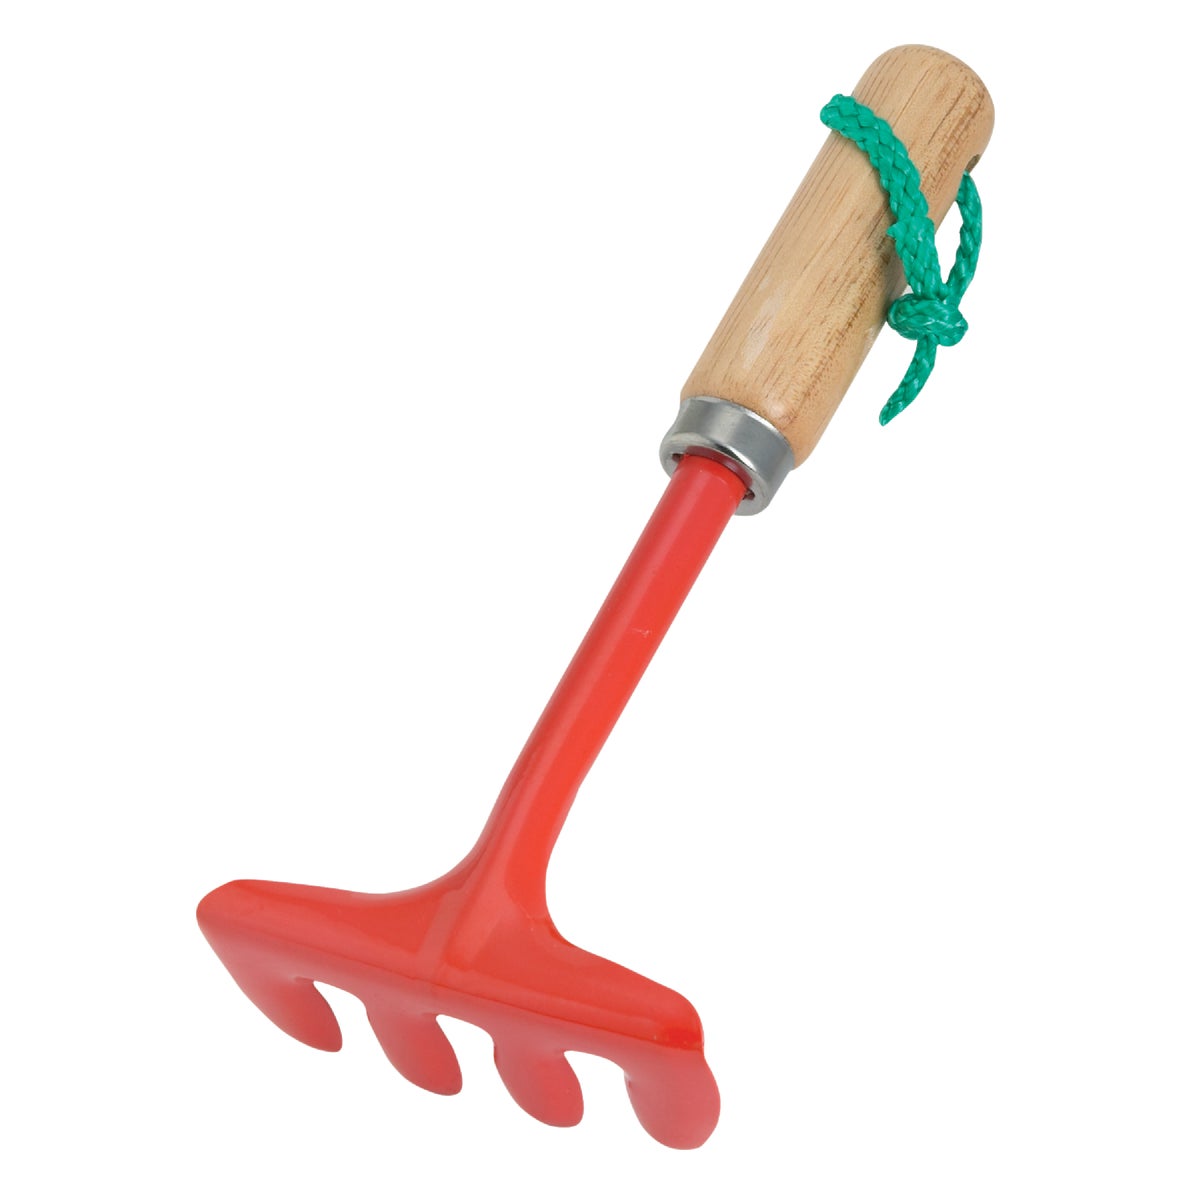 Item 706523, High-quality childrens garden hand fork is a scaled down replica of full 